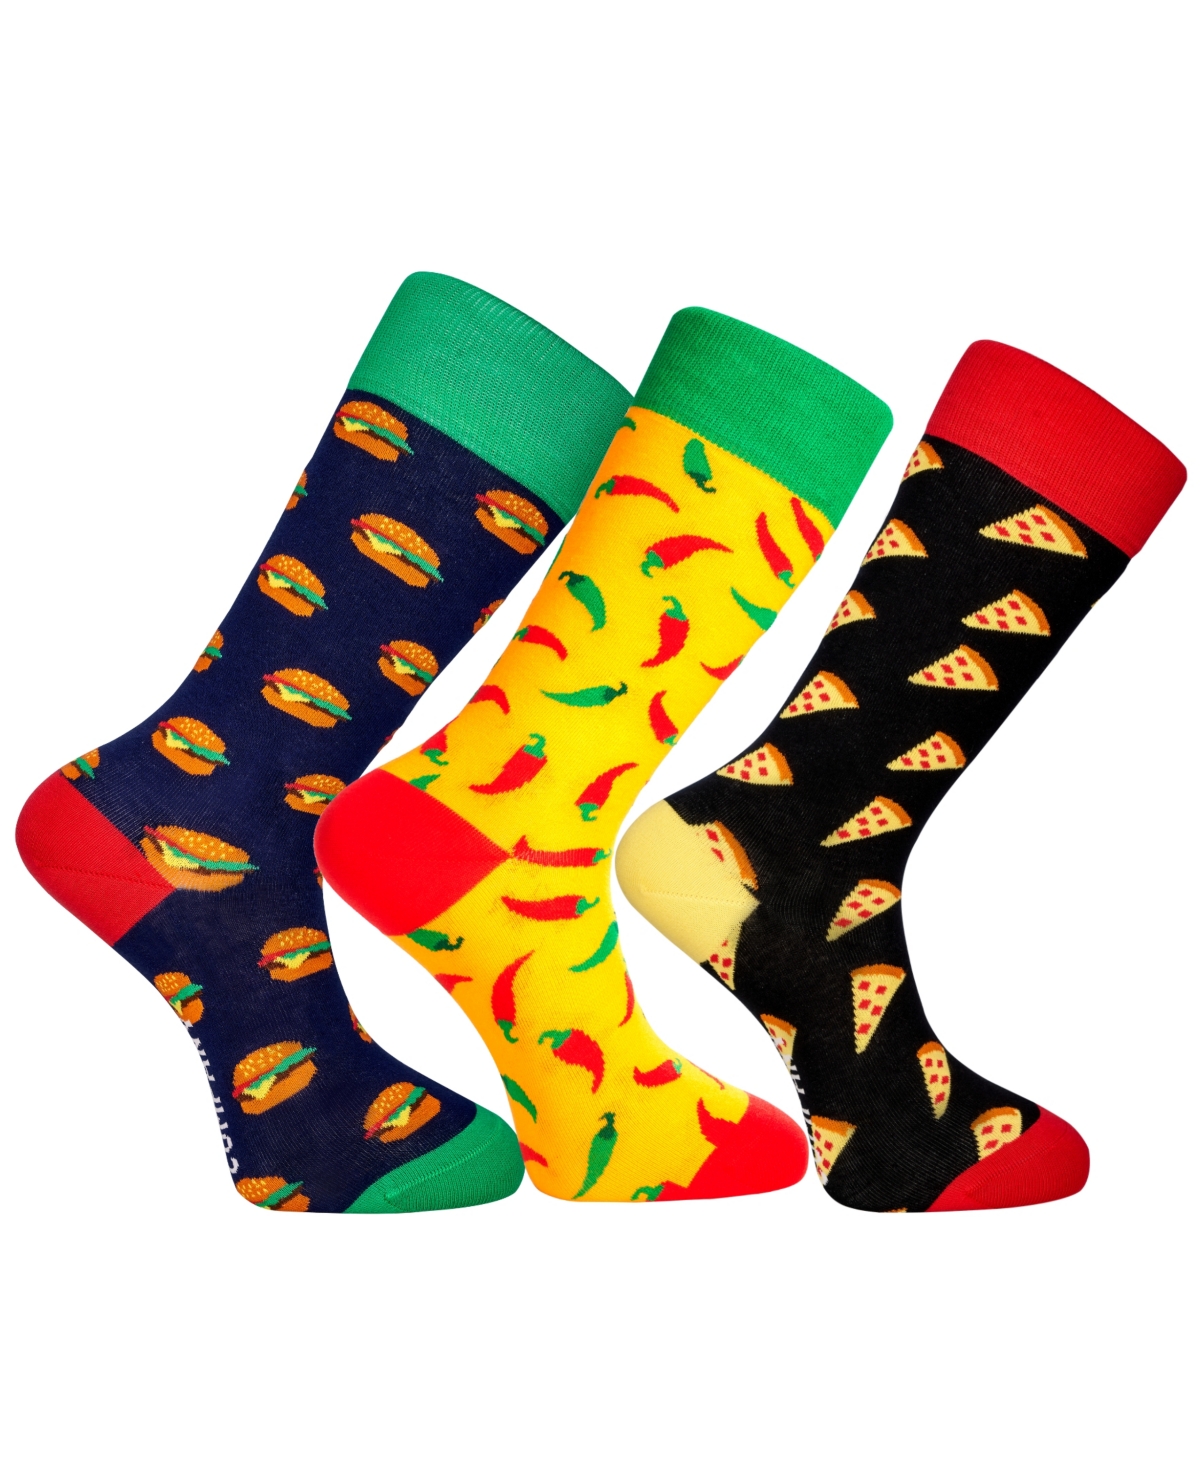 Love Sock Company Men's Houston Novelty Luxury Crew Socks Bundle Fun Colorful With Seamless Toe Design, Pack Of 3 In Multi Color